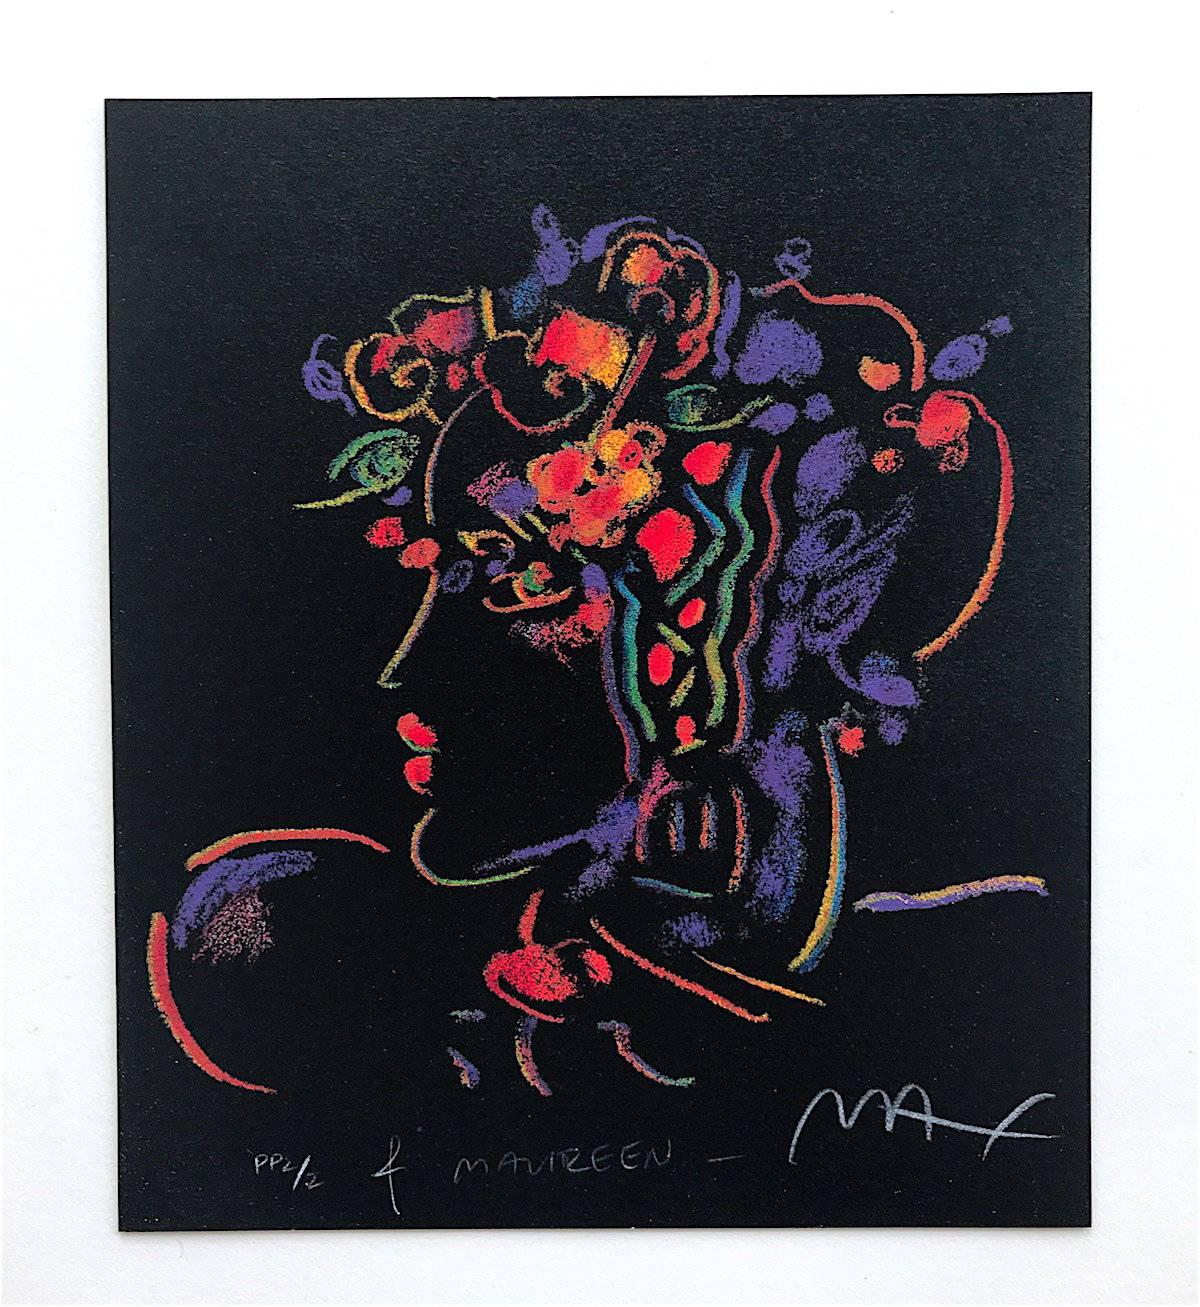 Romance Suite I: Lady, Signed Limited Edition, Fluorescent colors on Black 1